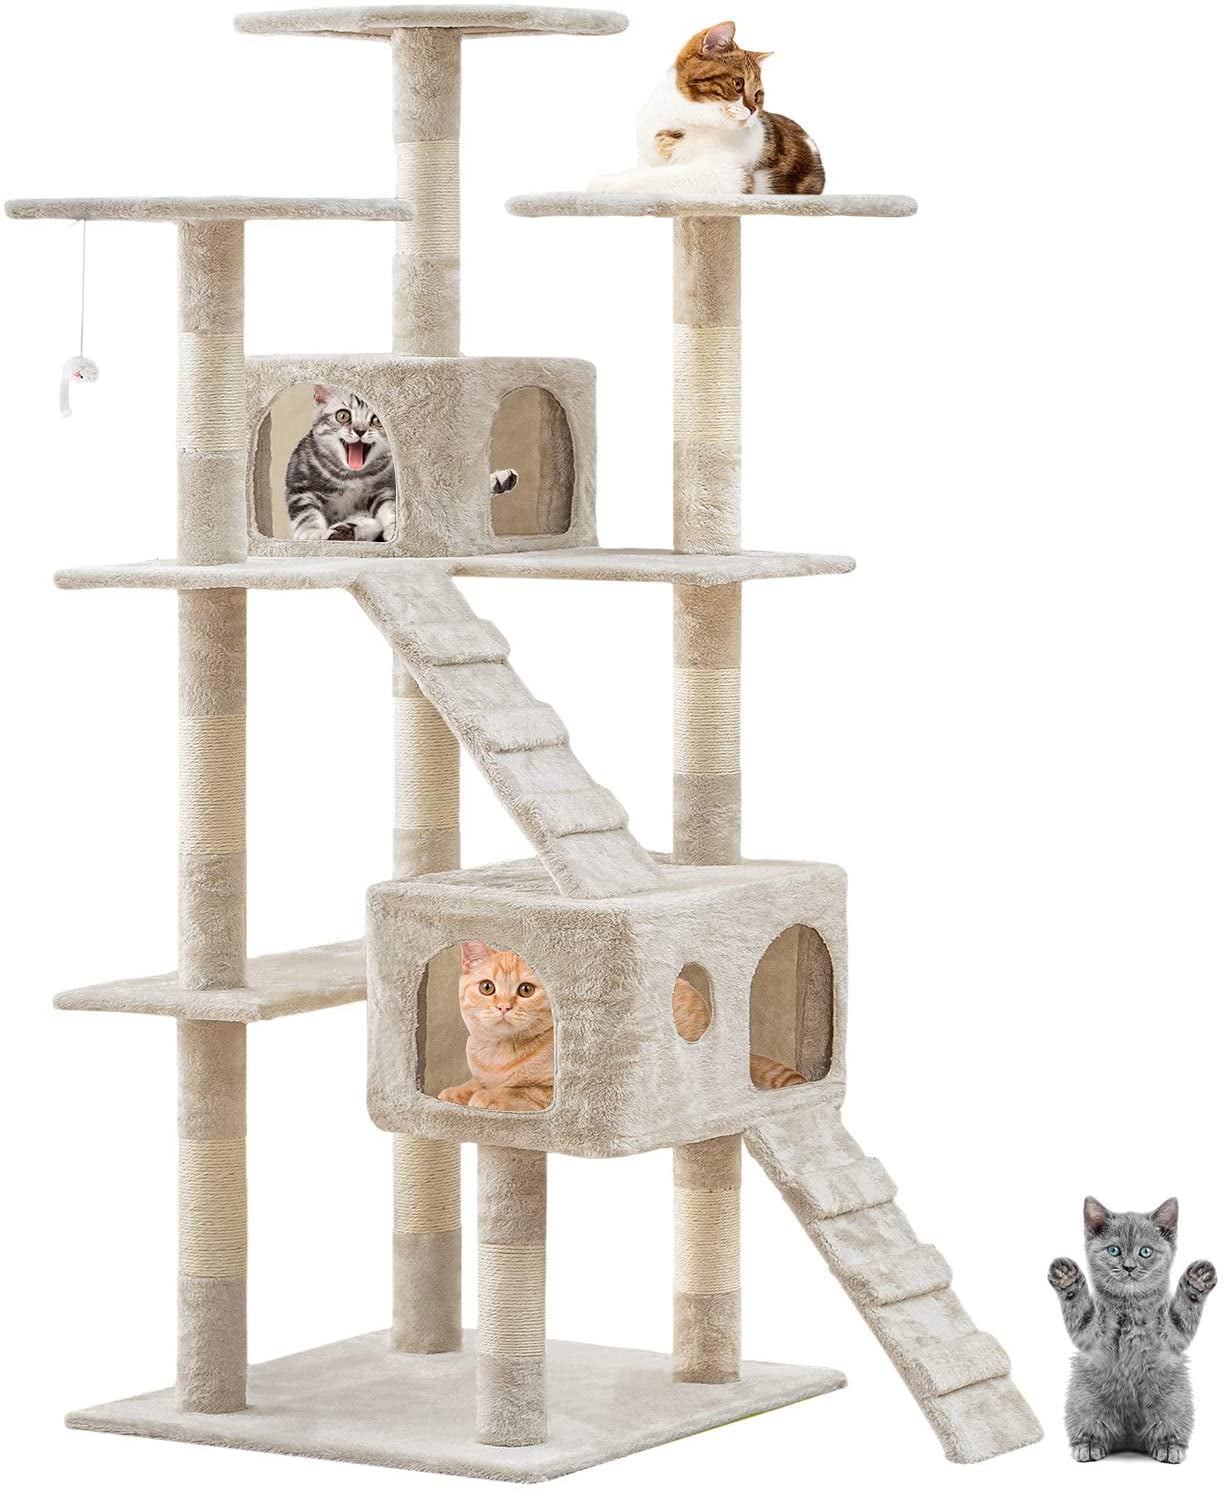 71" Scratching Post Cat Tree Kitty Condo Multi Level Play Activity Center Beige 